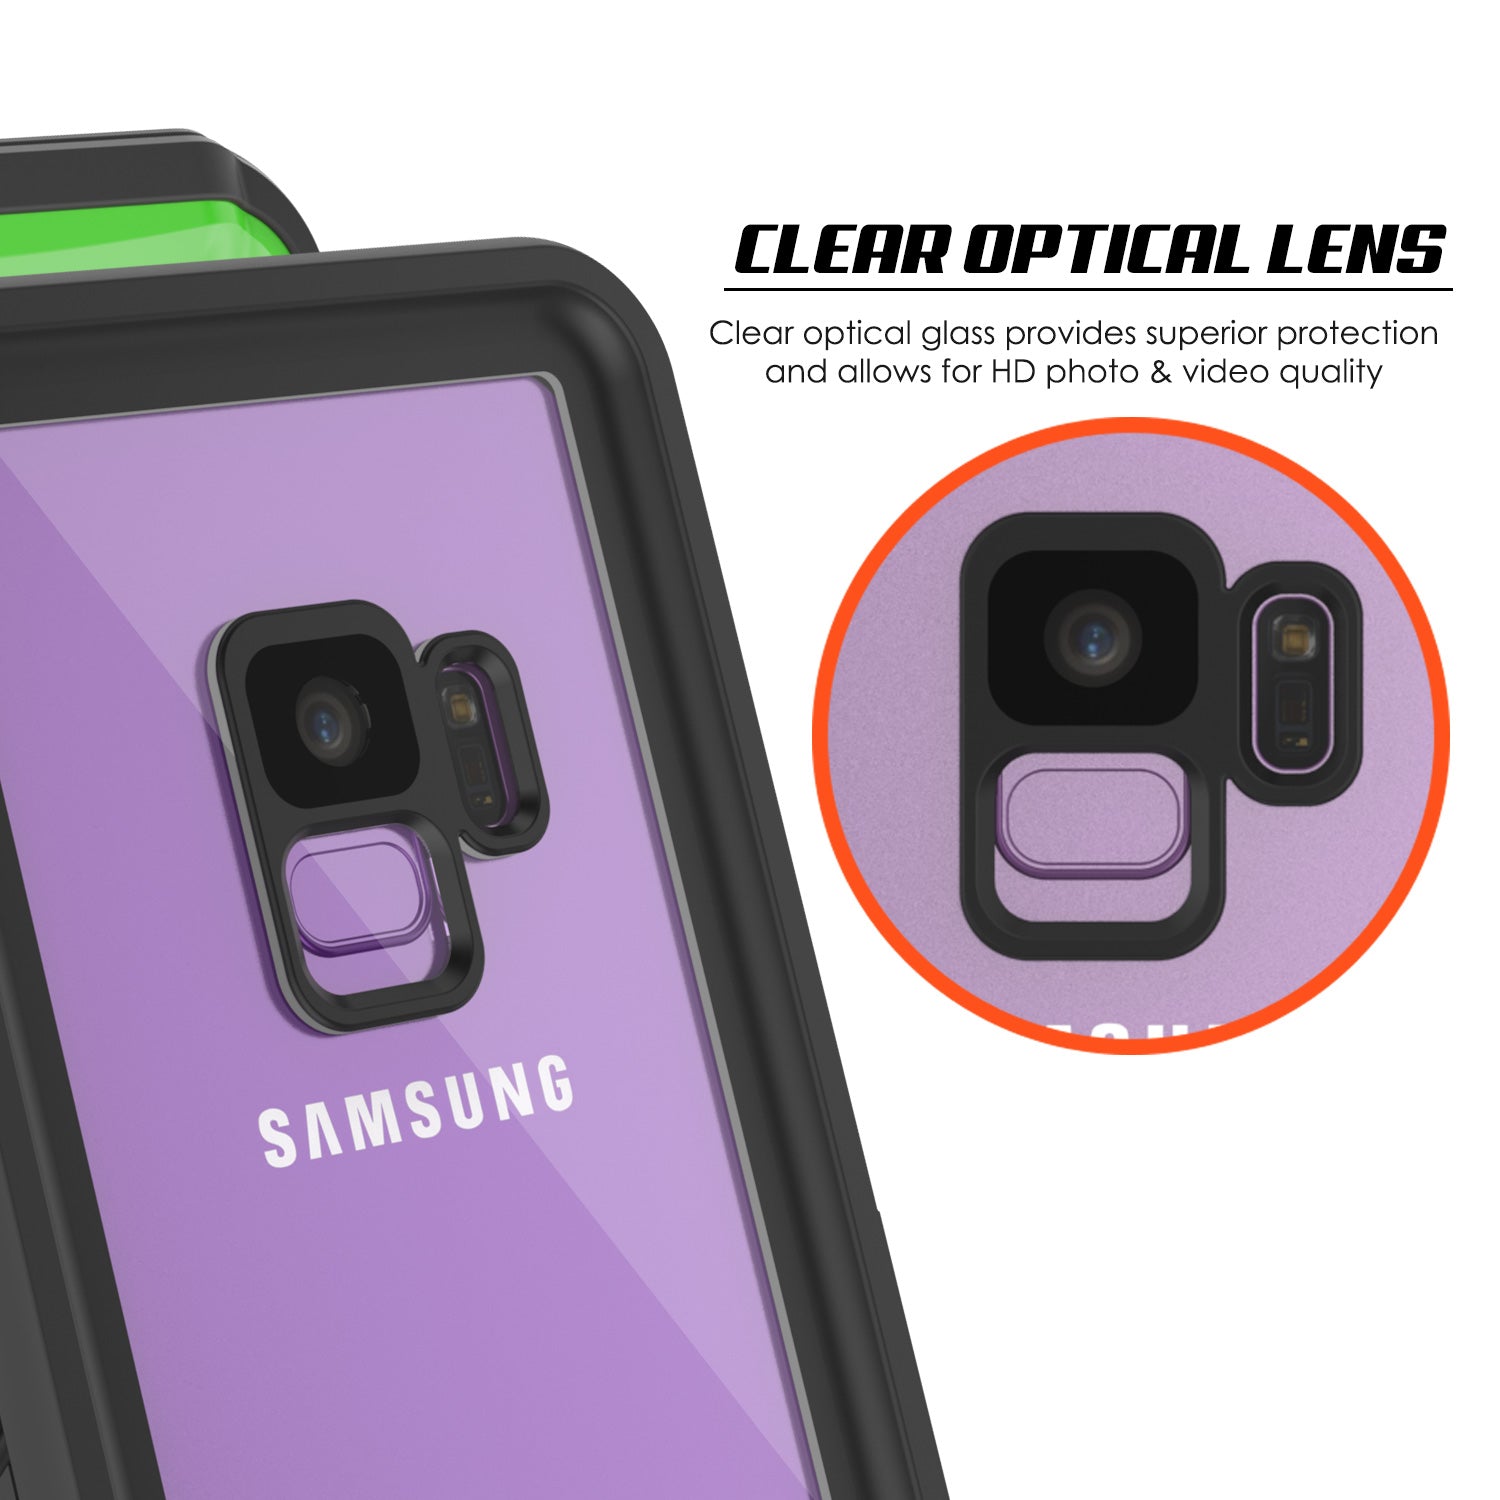 Galaxy S9 Plus Water/Shockproof Screen Protector Case [Light Green]